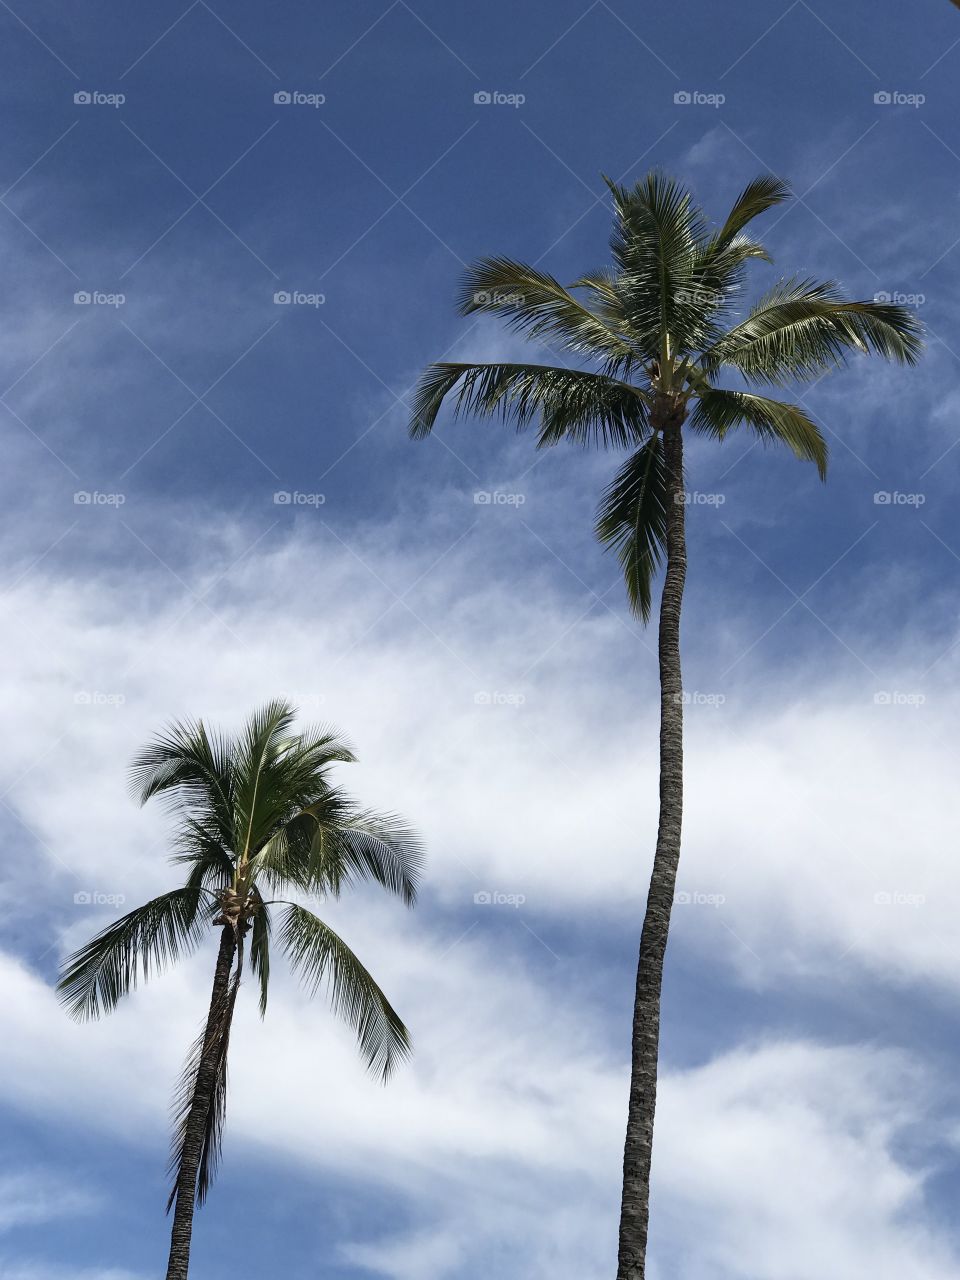 Palm trees against blue sky with clouds 